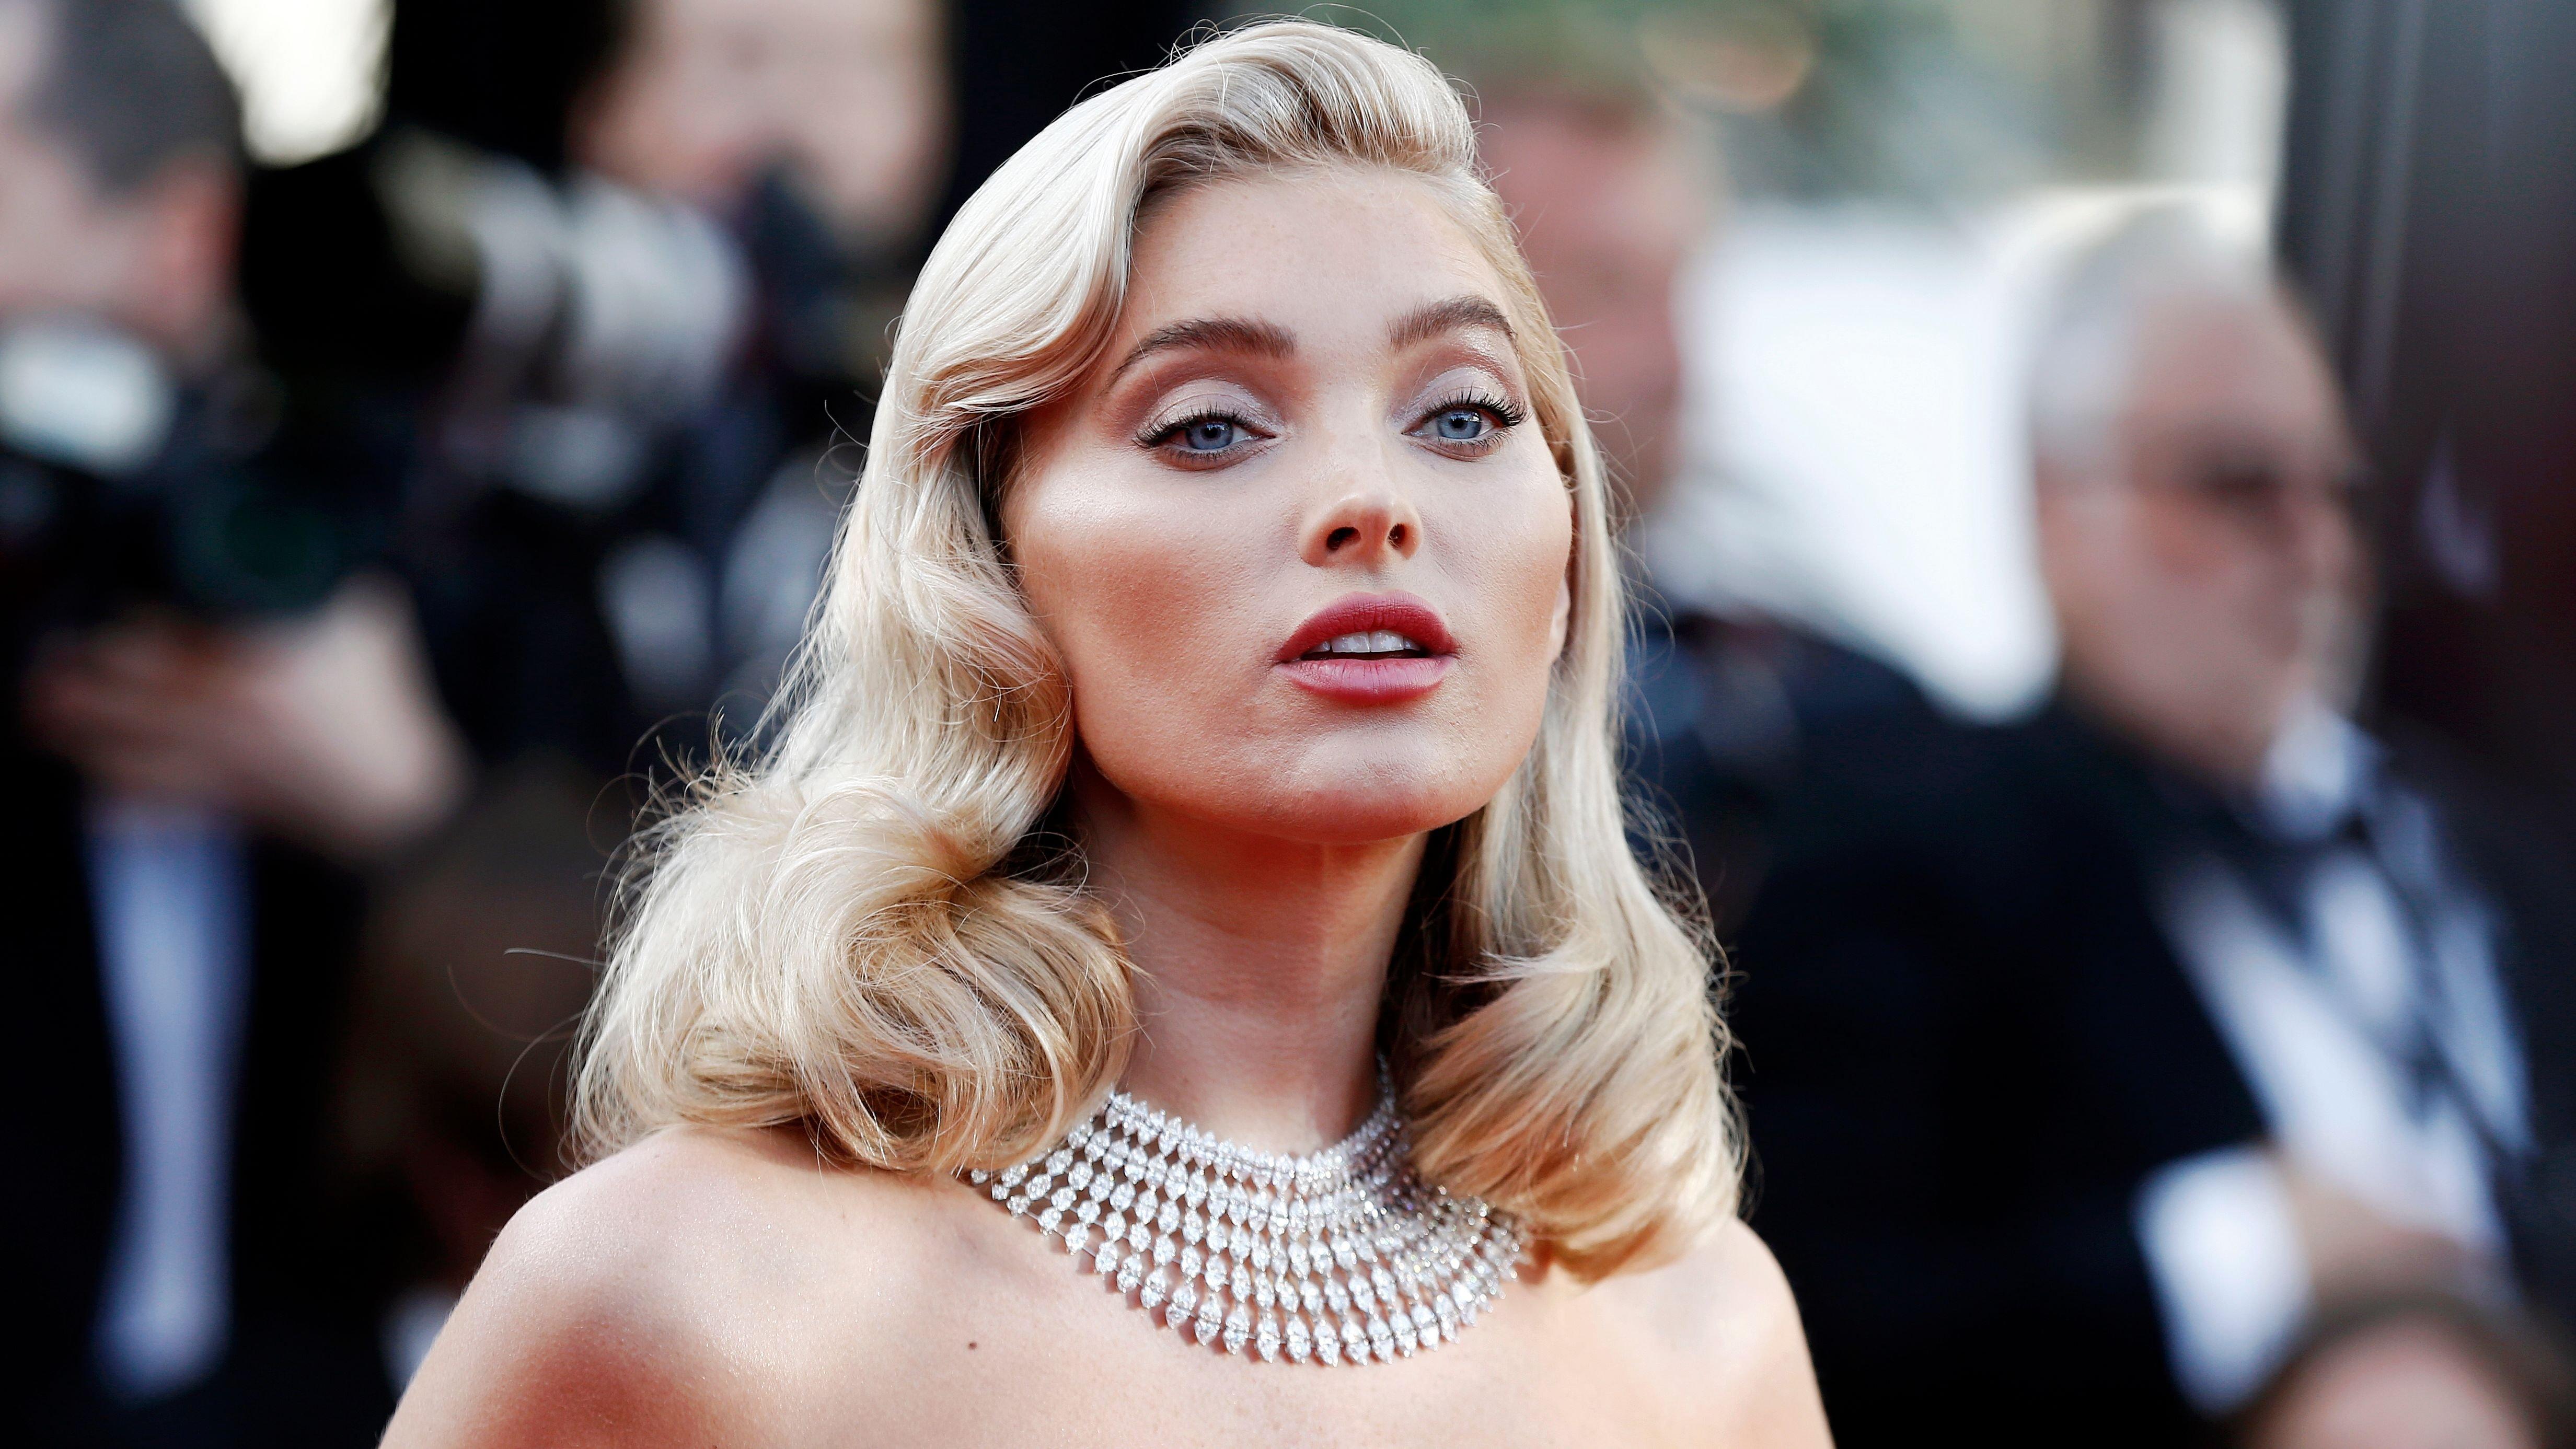 Elsa Hosk exudes Old Hollywood glam in strapless dress, curls, and statement necklace on the red carpet.